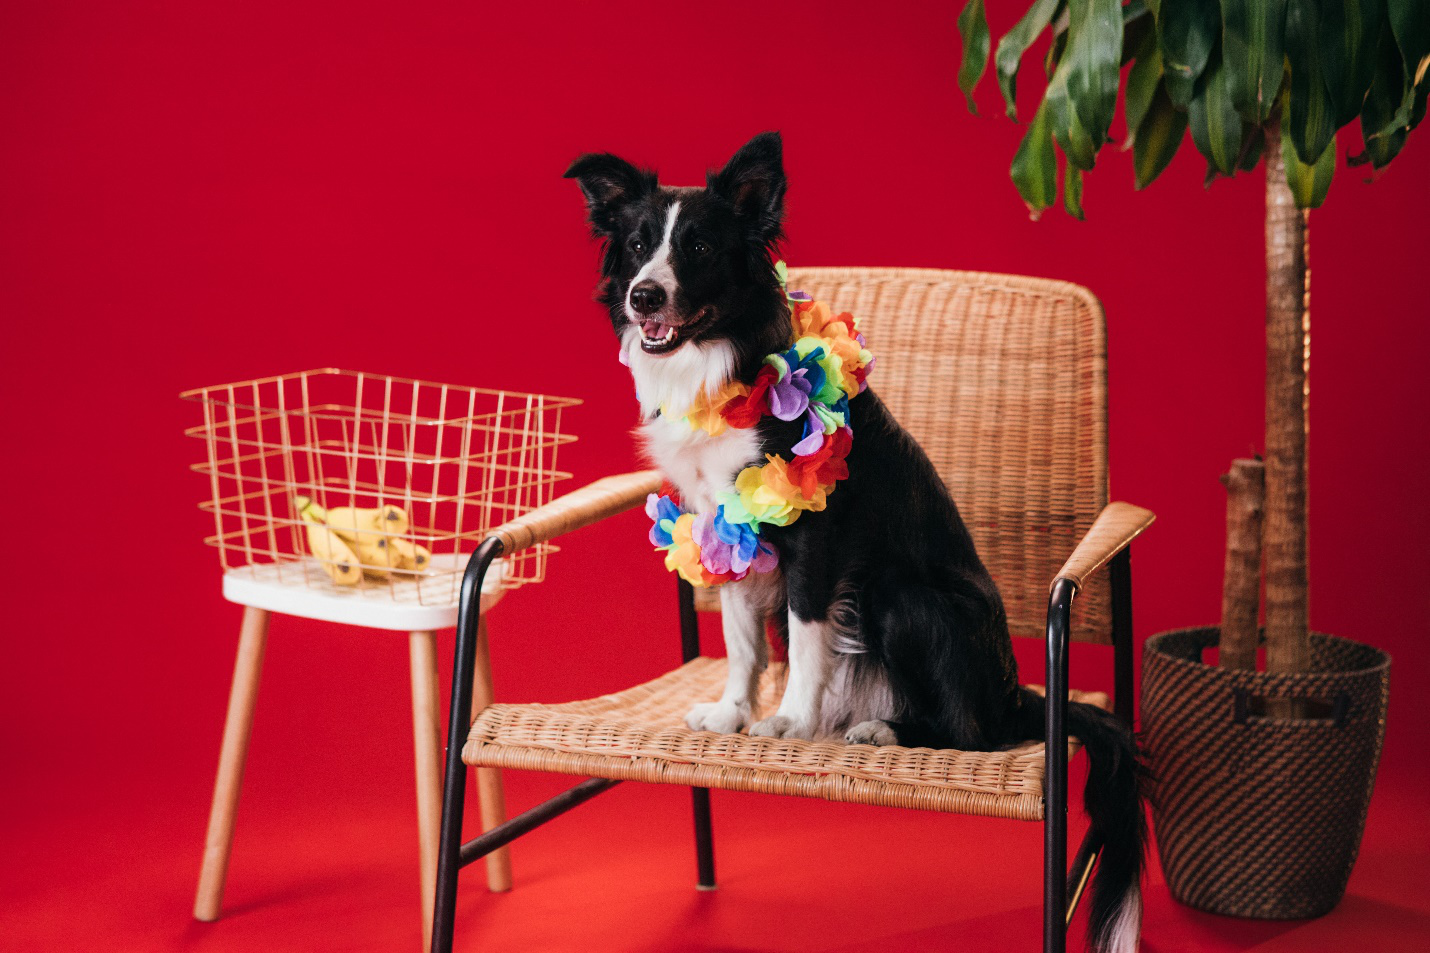 A black and white dog poses on a chair with a colorful garland around him and a wire frame basked with bananas in it on one side and a plant on the other against a red background showing what it would be like at a pet resort that offers dog boarding facilities.